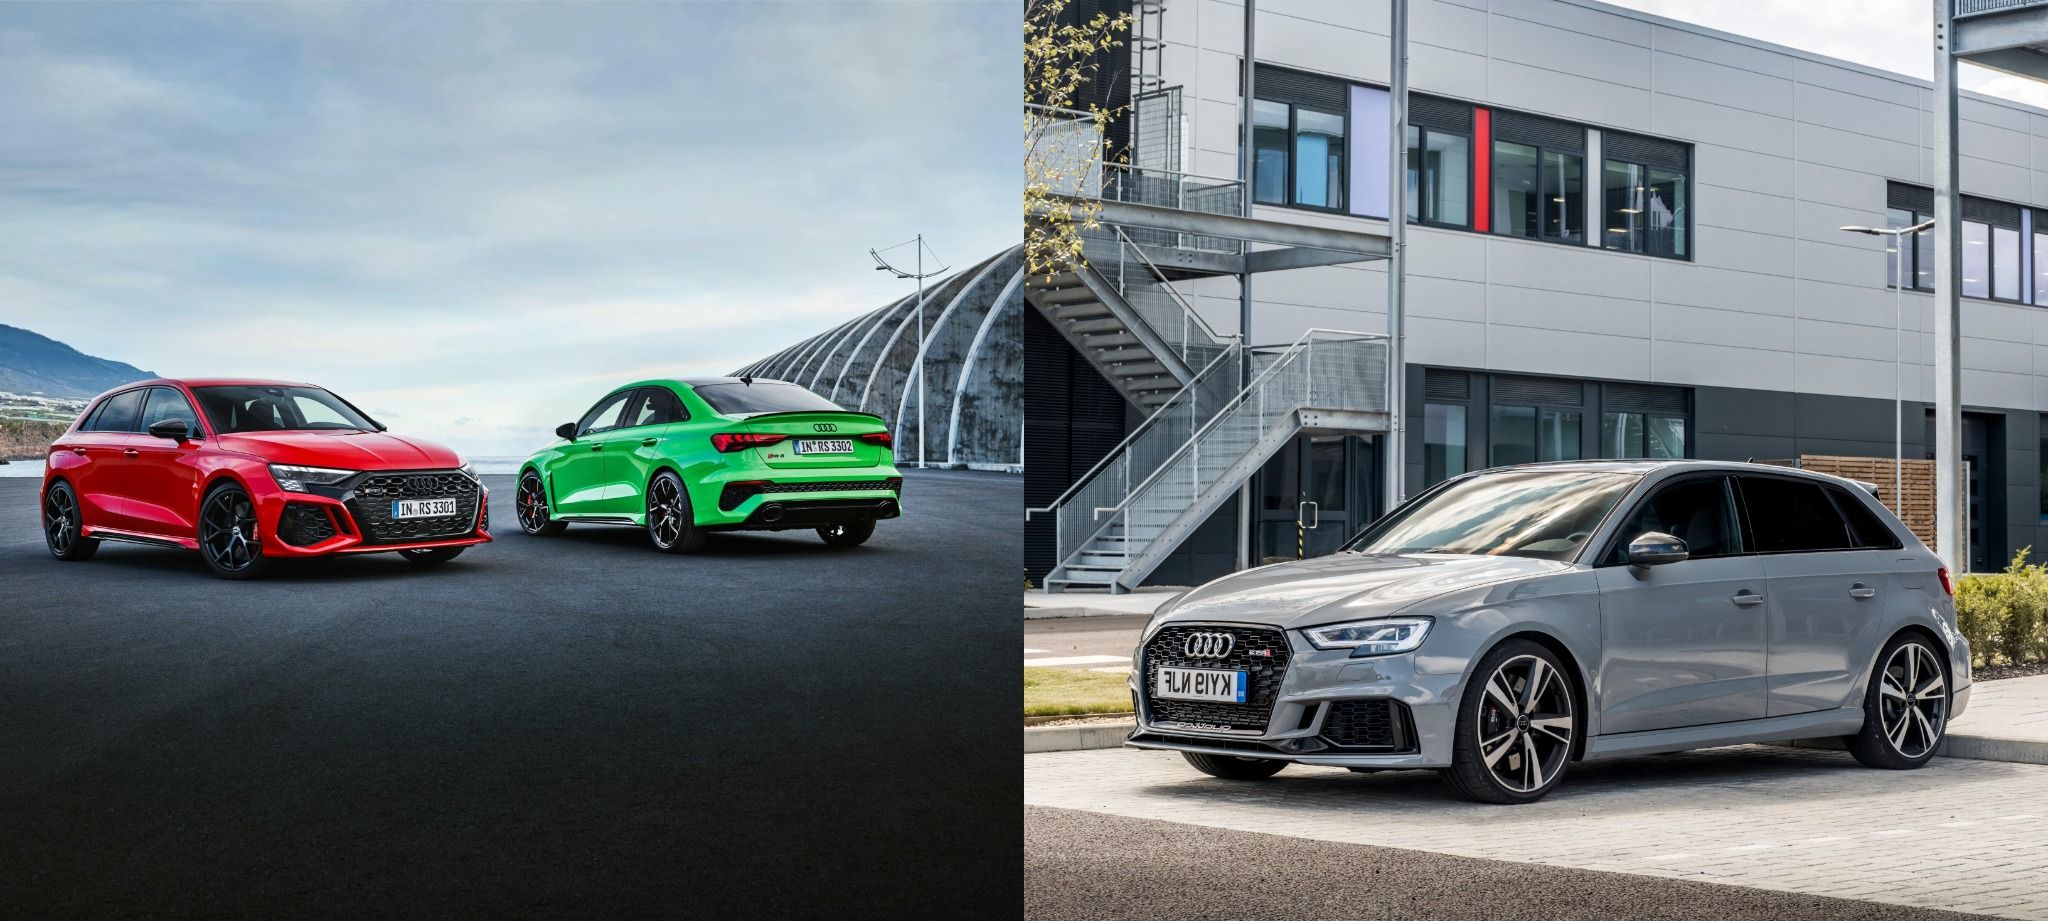 New and old audi rs3 collage